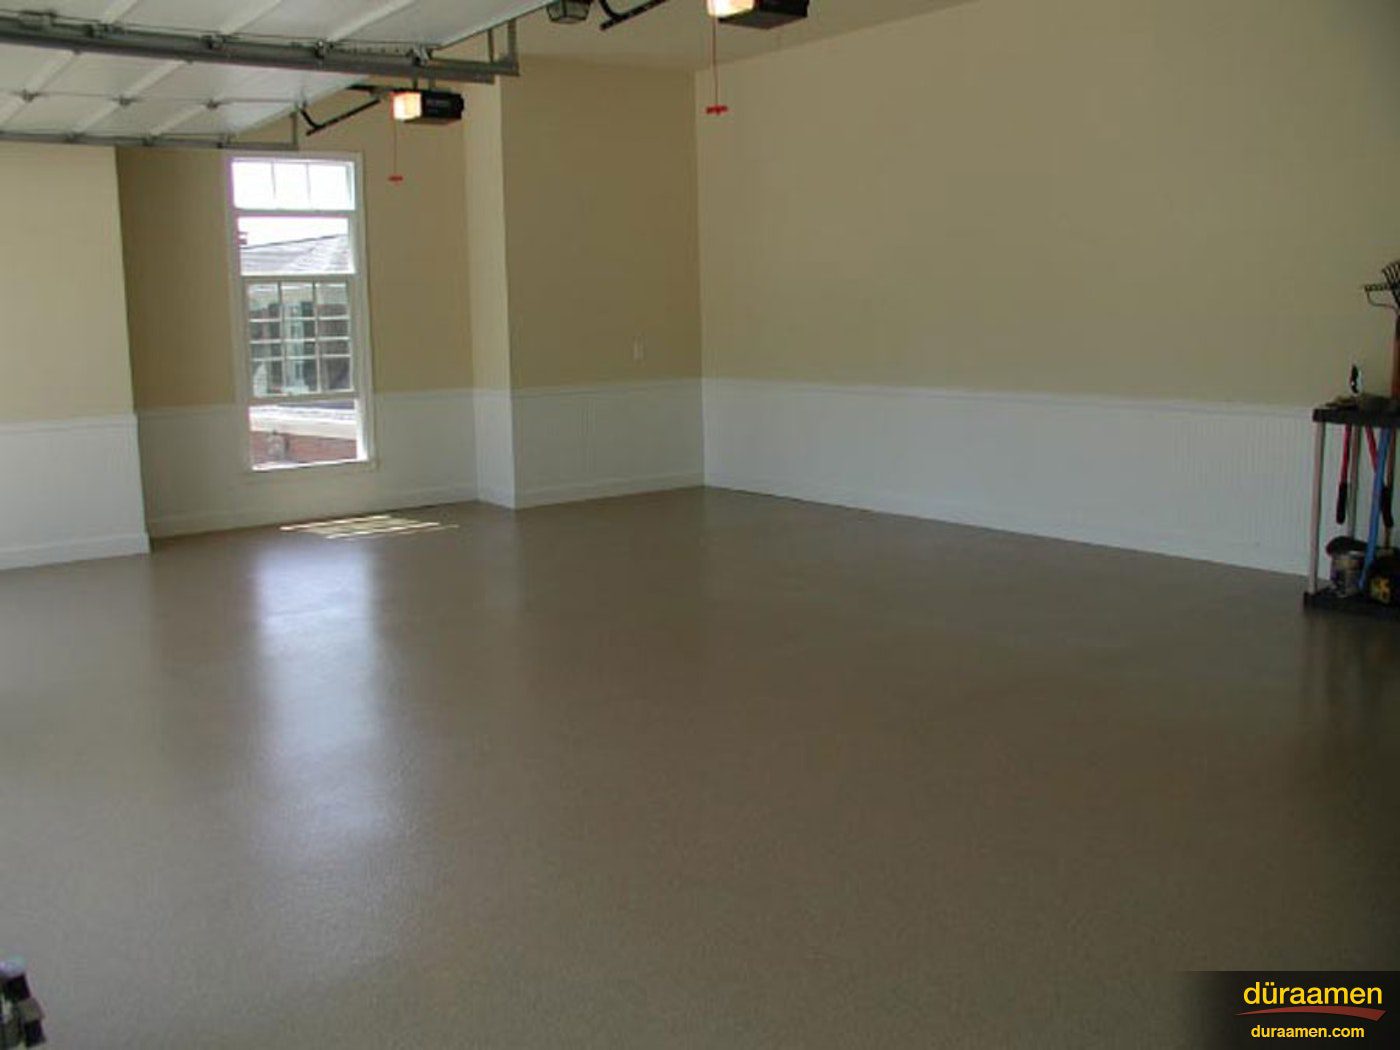 Endura is a professional resin chip epoxy garage flooring system that last much longer and resists wear and tear much better than store bought kits Endura Epoxy Resin Chip Flooring in a Residential Garage | Duraamen Engineered Products Inc